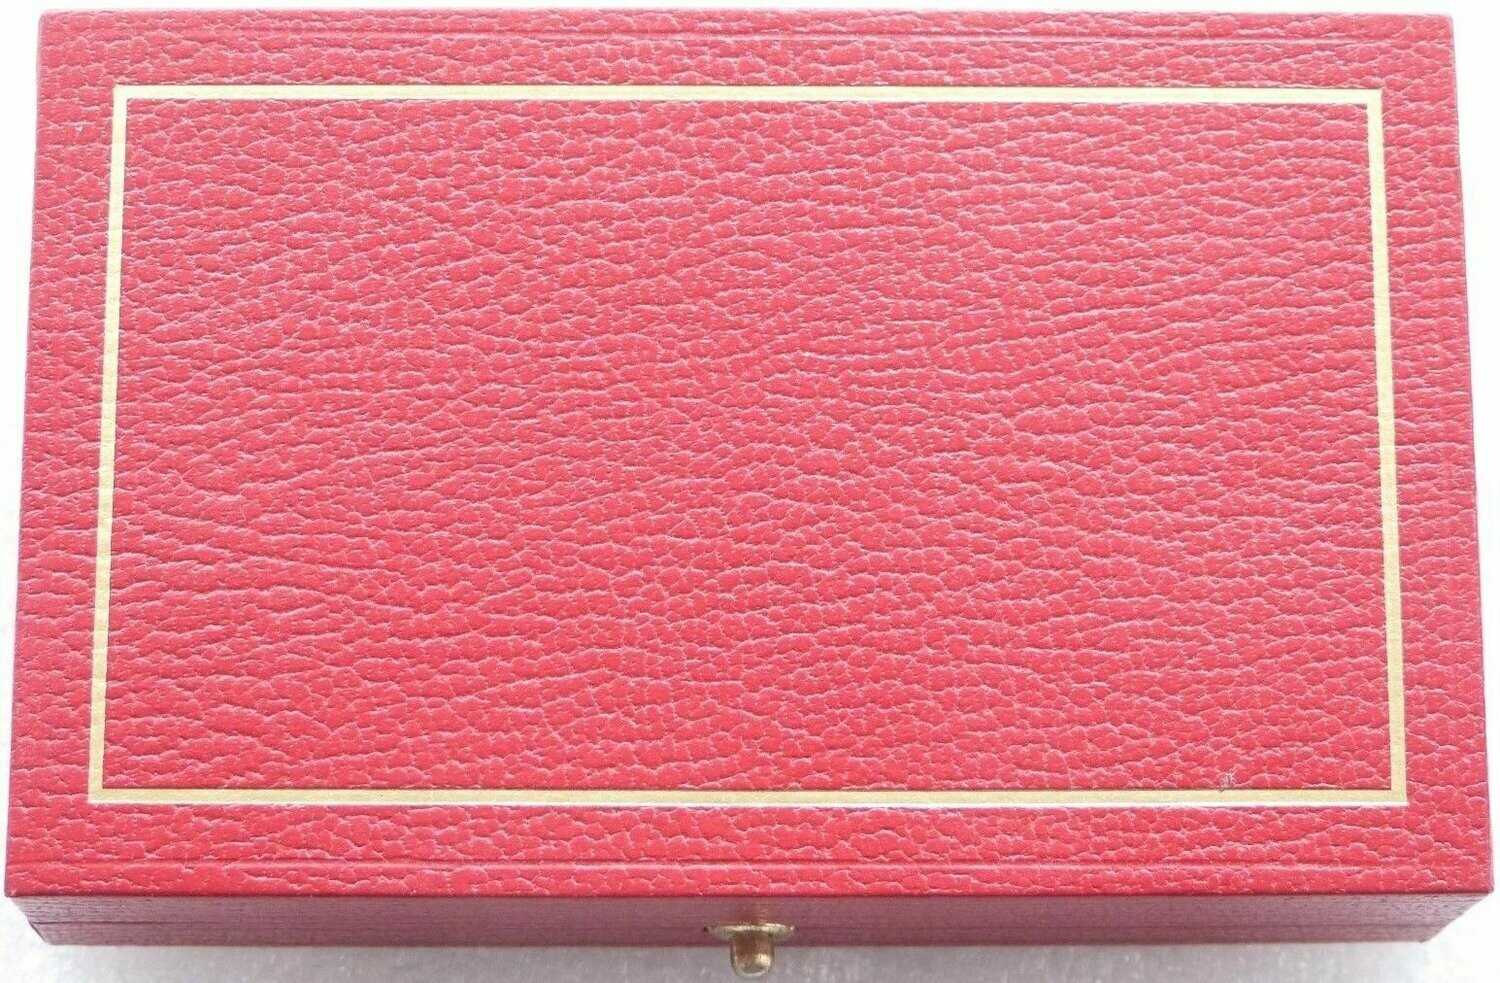 Royal Mint Gold Sovereign 2 Coin Set Red Leather Box No Coins